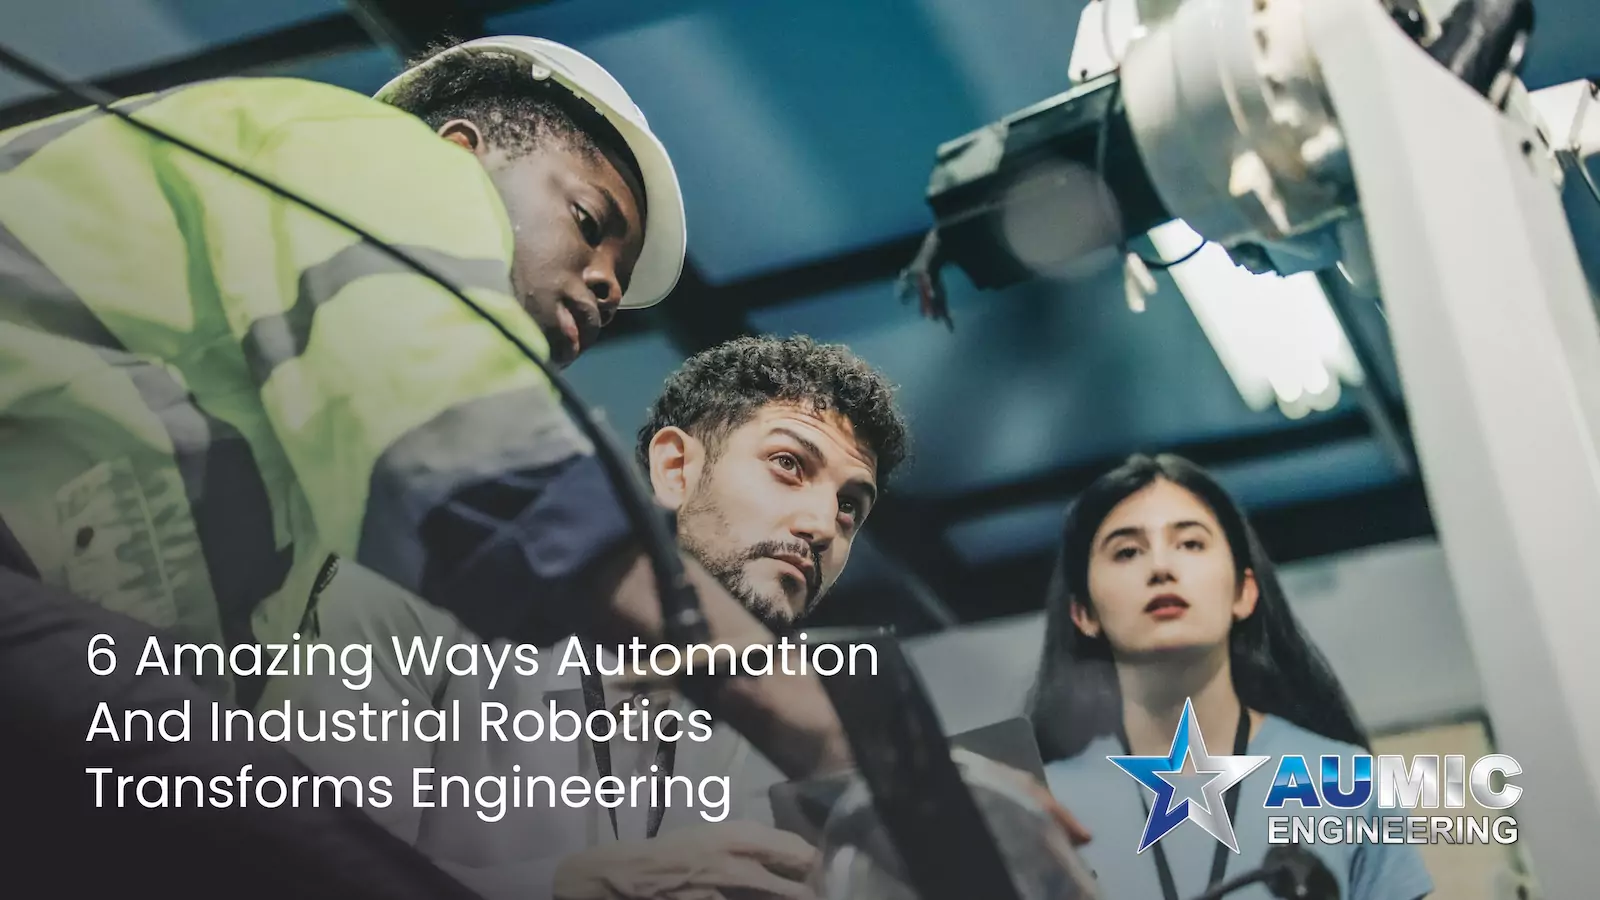 This is an image of an article about 6 Amazing Ways Automation And Industrial Robotics Transforms Engineering - Aumic Engineering